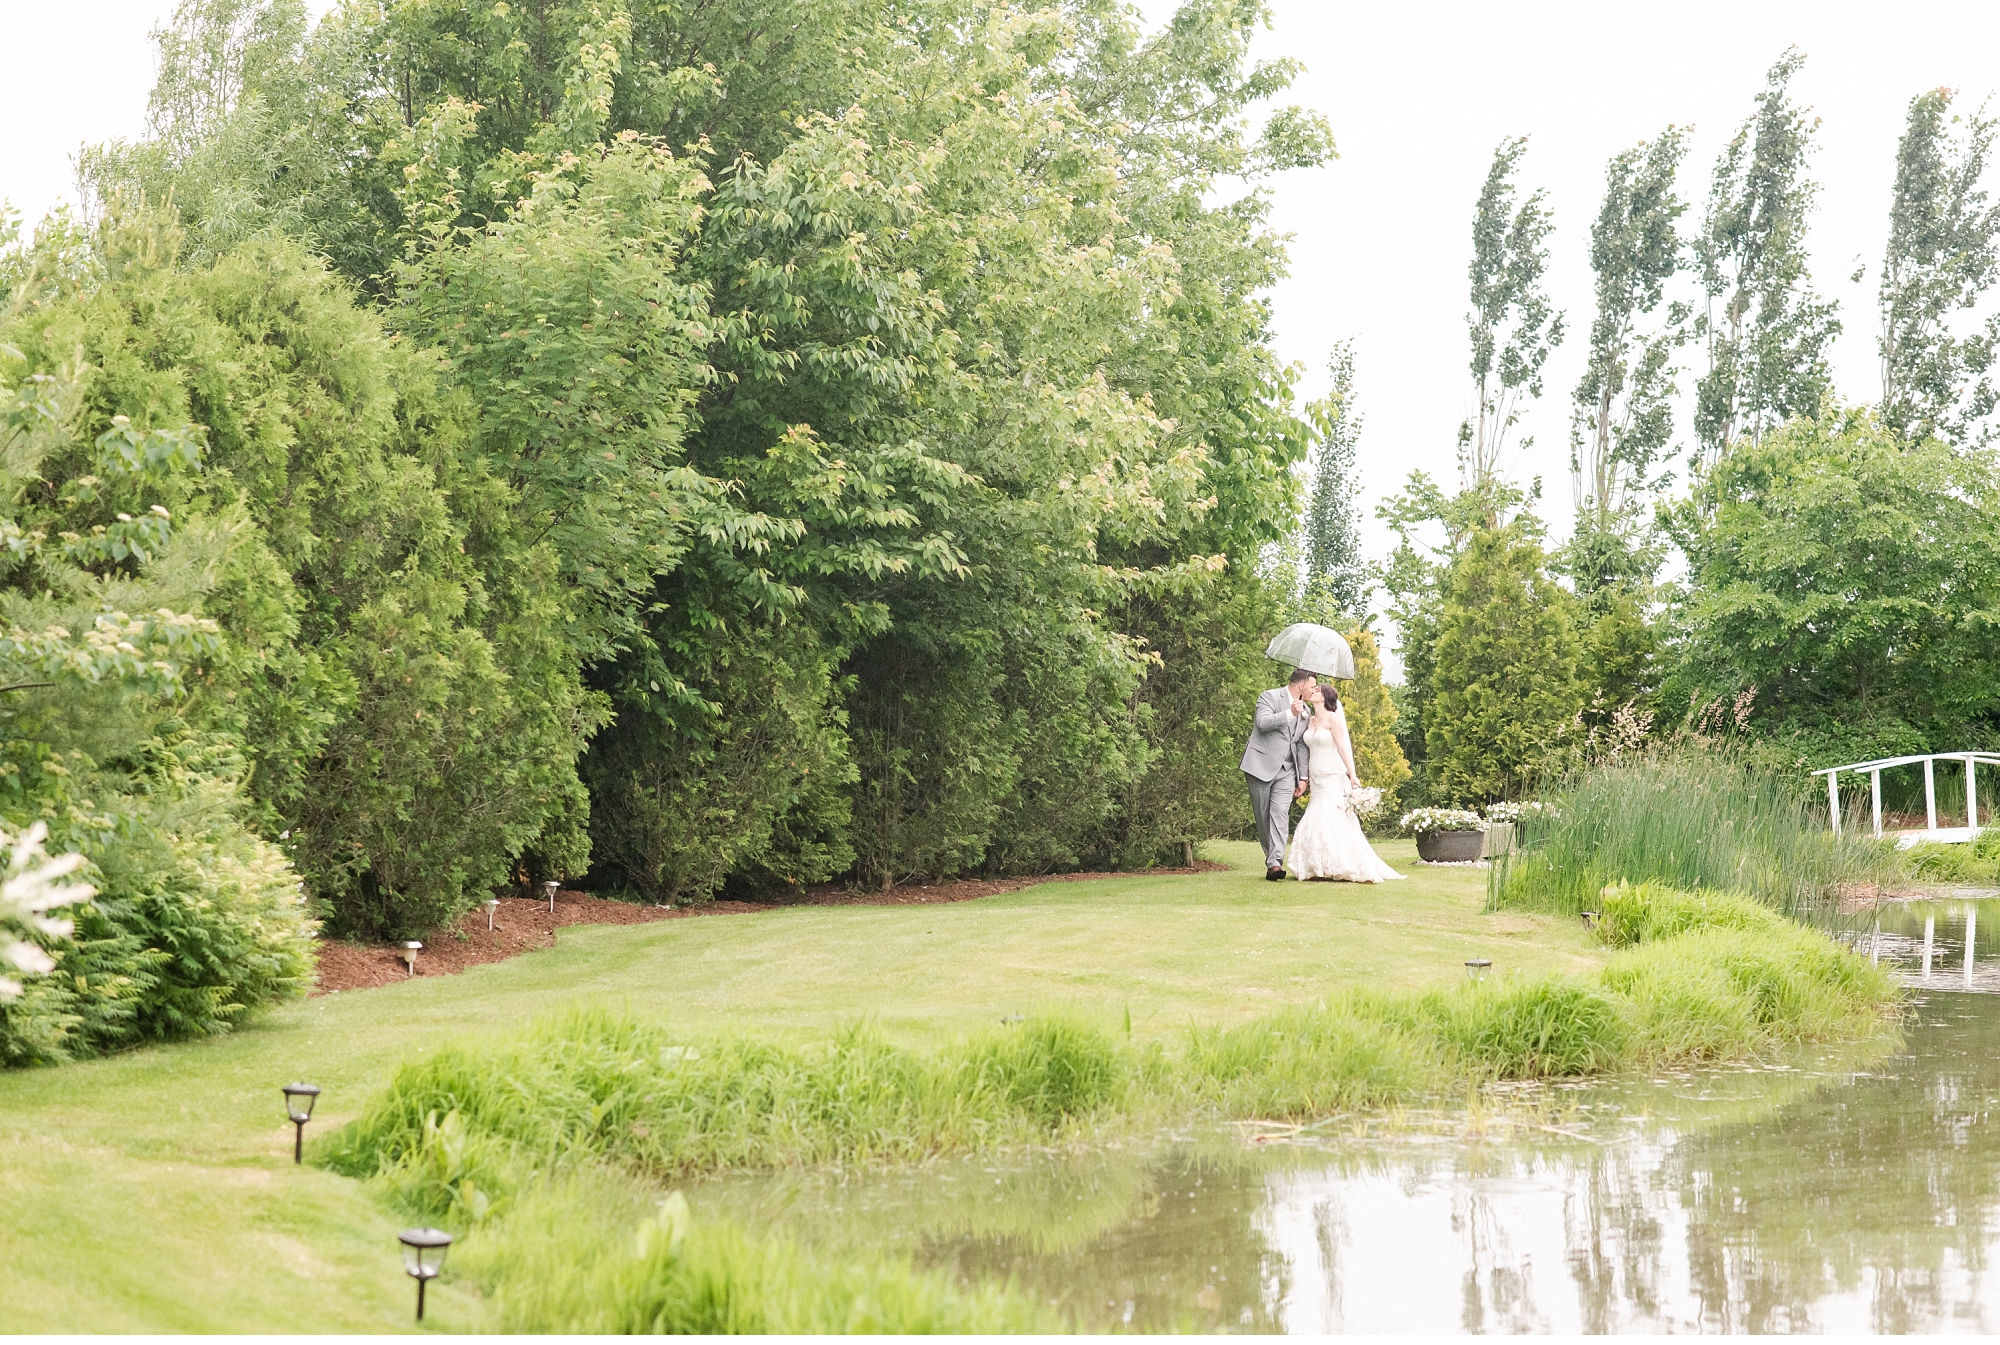 a couple walks across the grass beside a pond on their wedding day. the groom is holding an umbrella above their heads. photo by kelowna wedding photographer life is beautiful photography